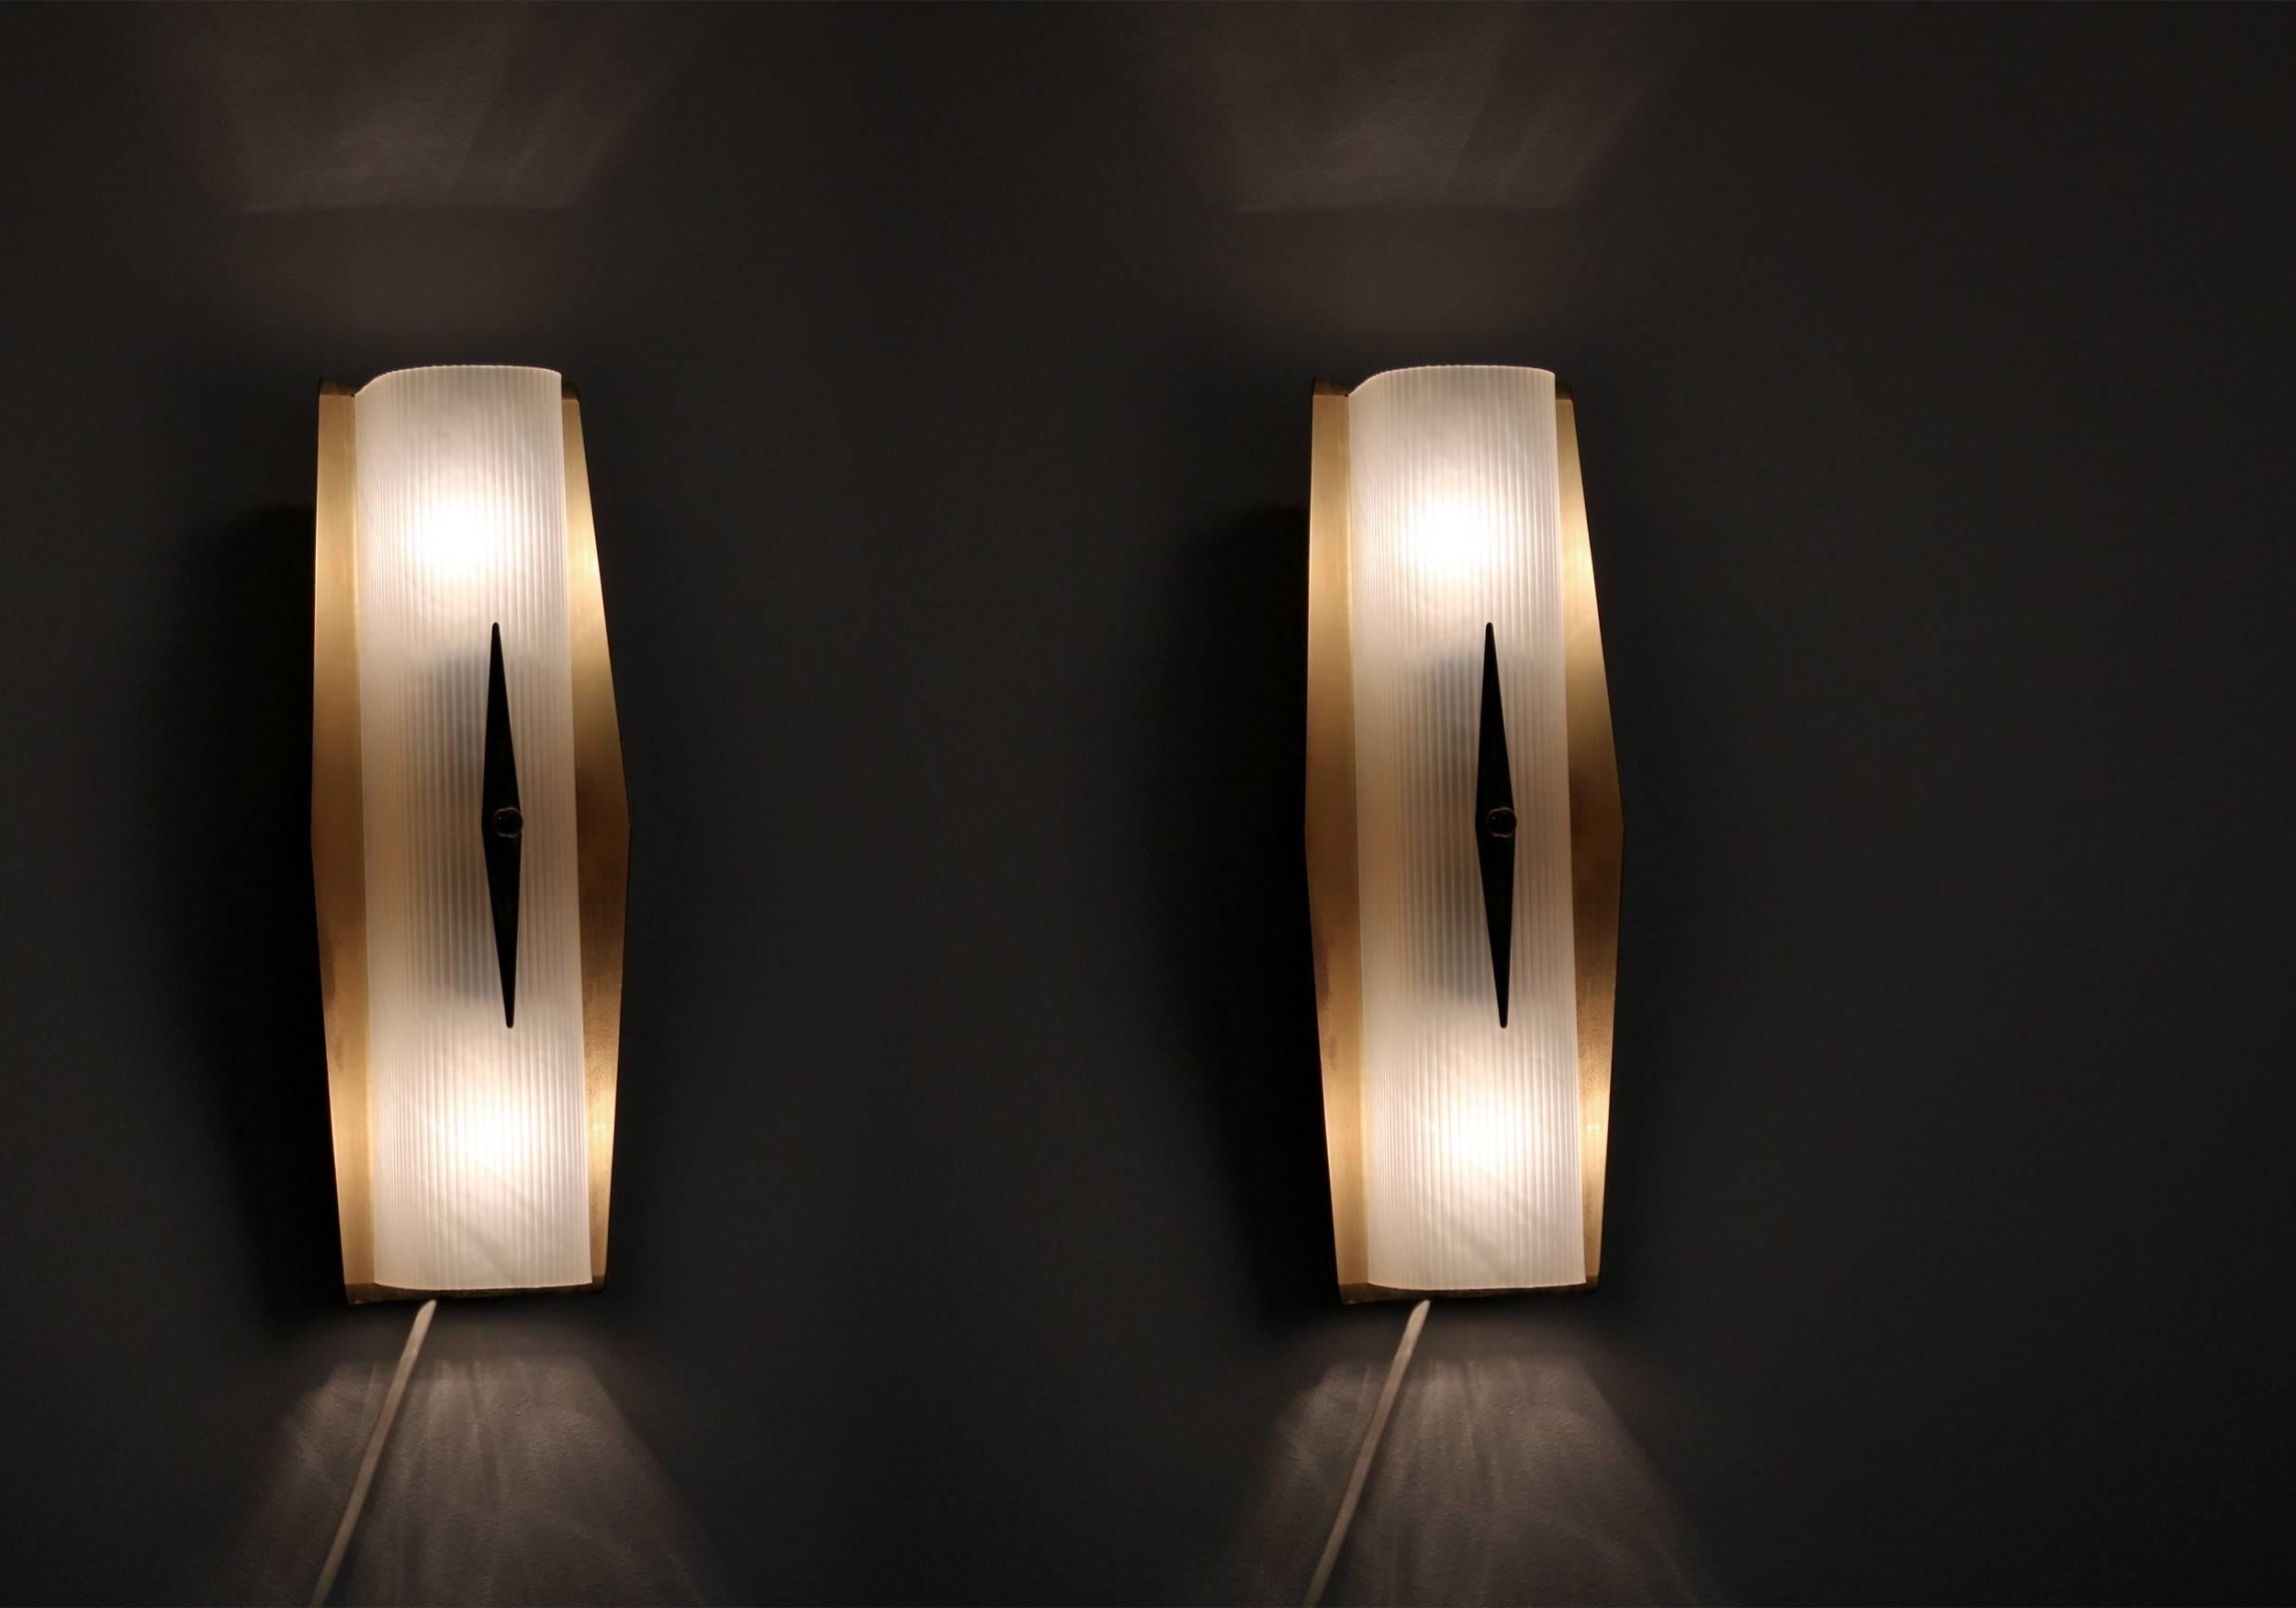 Mid-20th Century Pair of Functionalist Wall Sconces in Brass by Høvik Lys, 1950s